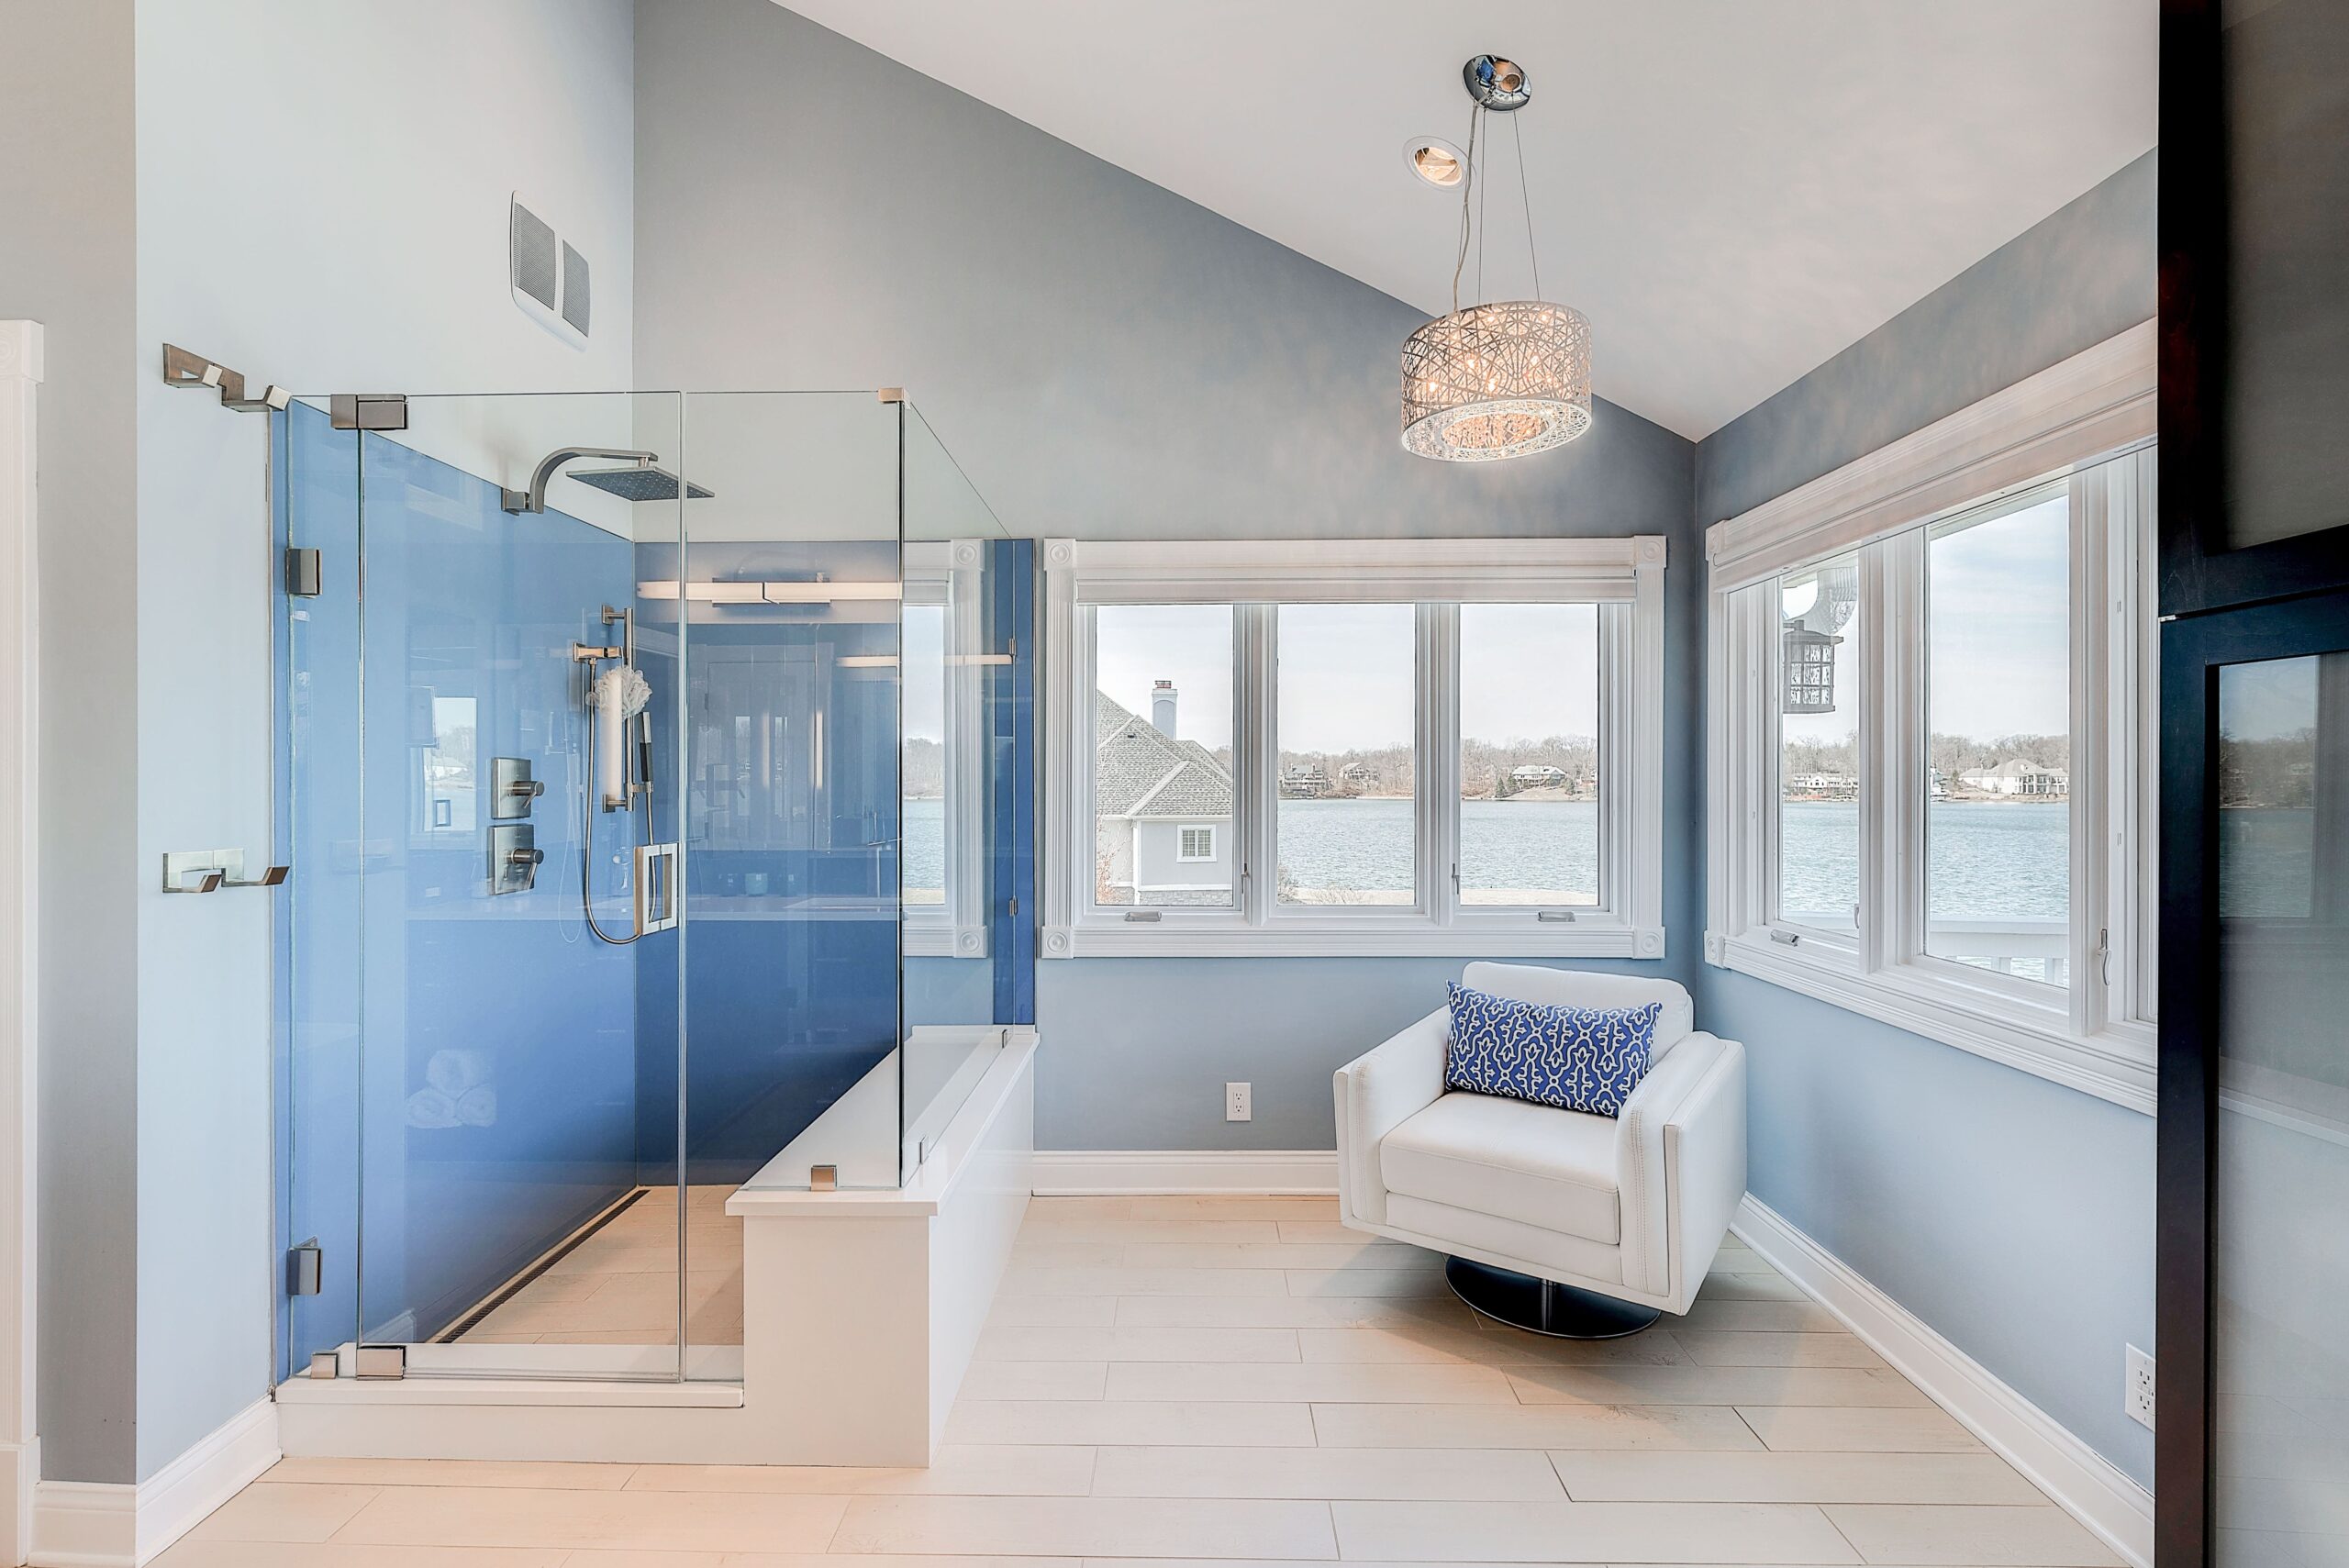 Clear glass shower room with seaside view